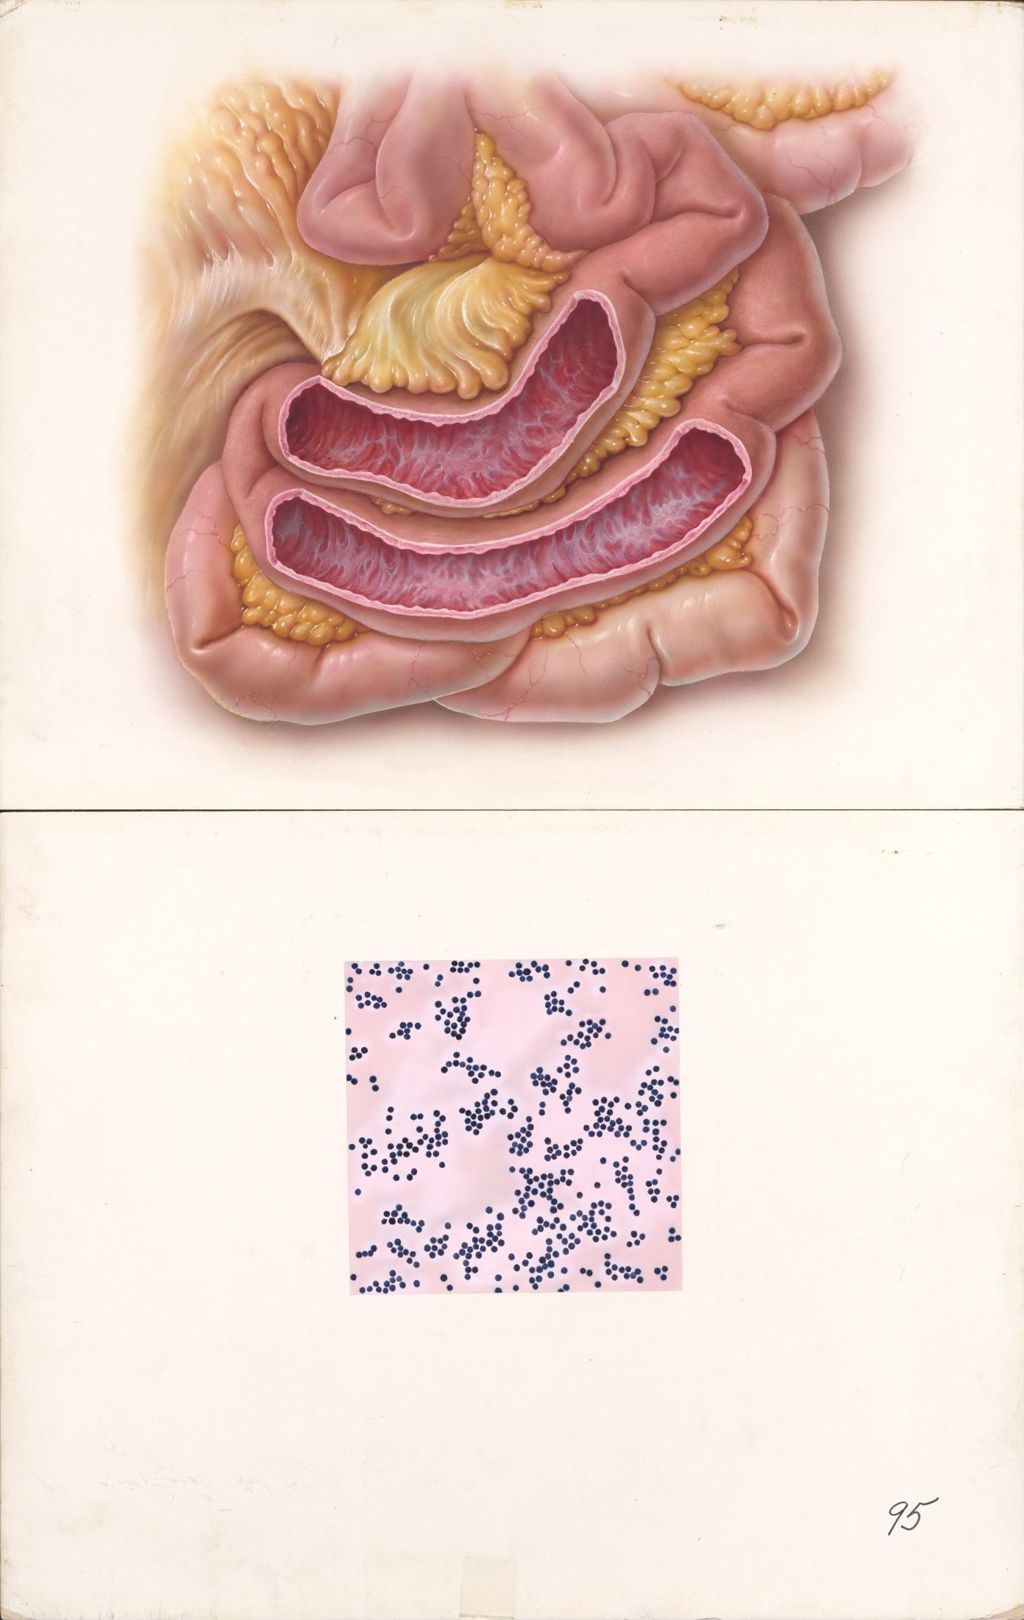 Miniature of Medical Profiles, Ne[illegible]adine Infections of the Intestine, Plate I, Acute Staphylococcal Enteritis